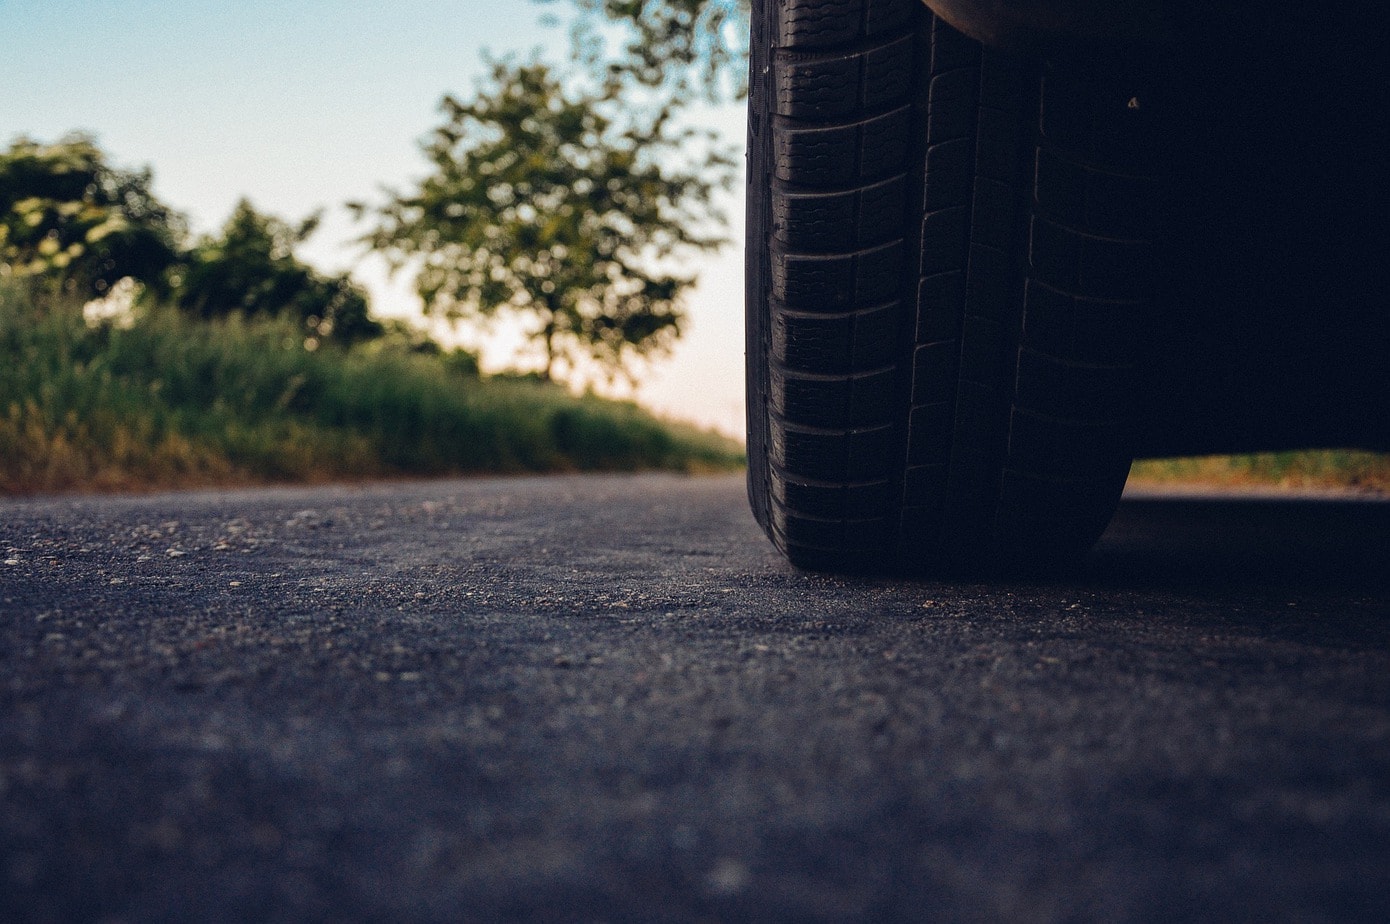 Types of tread in automobile tires